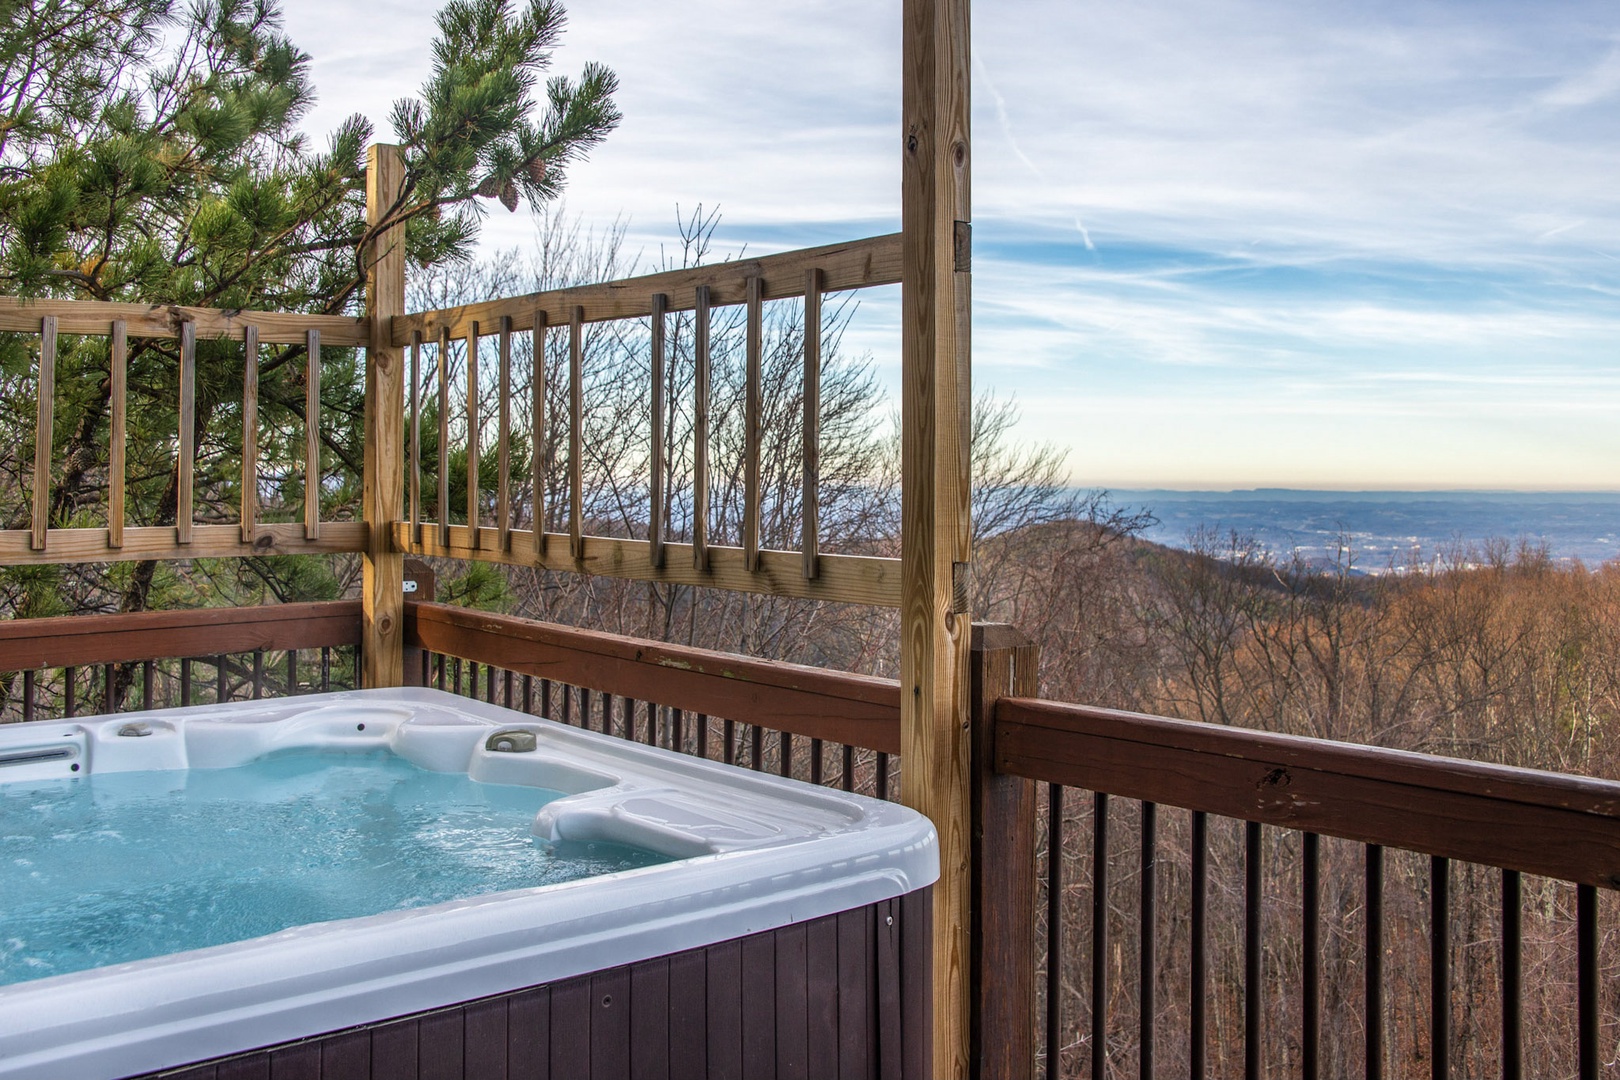 Soak all your cares away with stunning views on the back deck